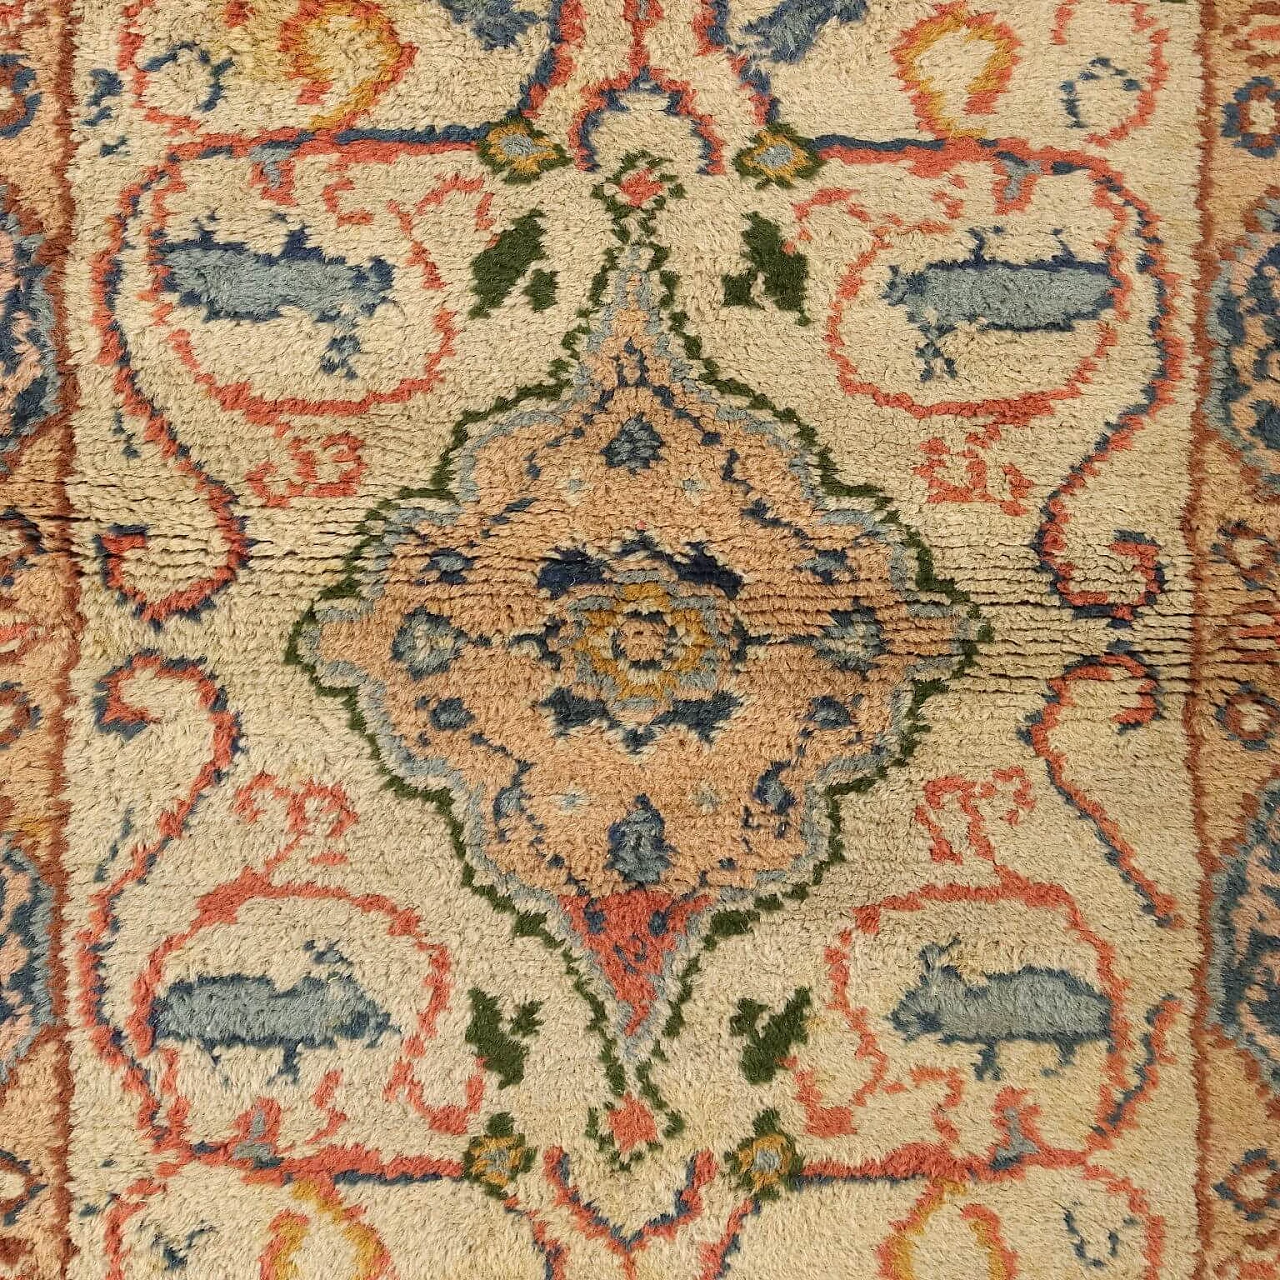 3 Moroccan cotton and wool Marrakech rugs 3